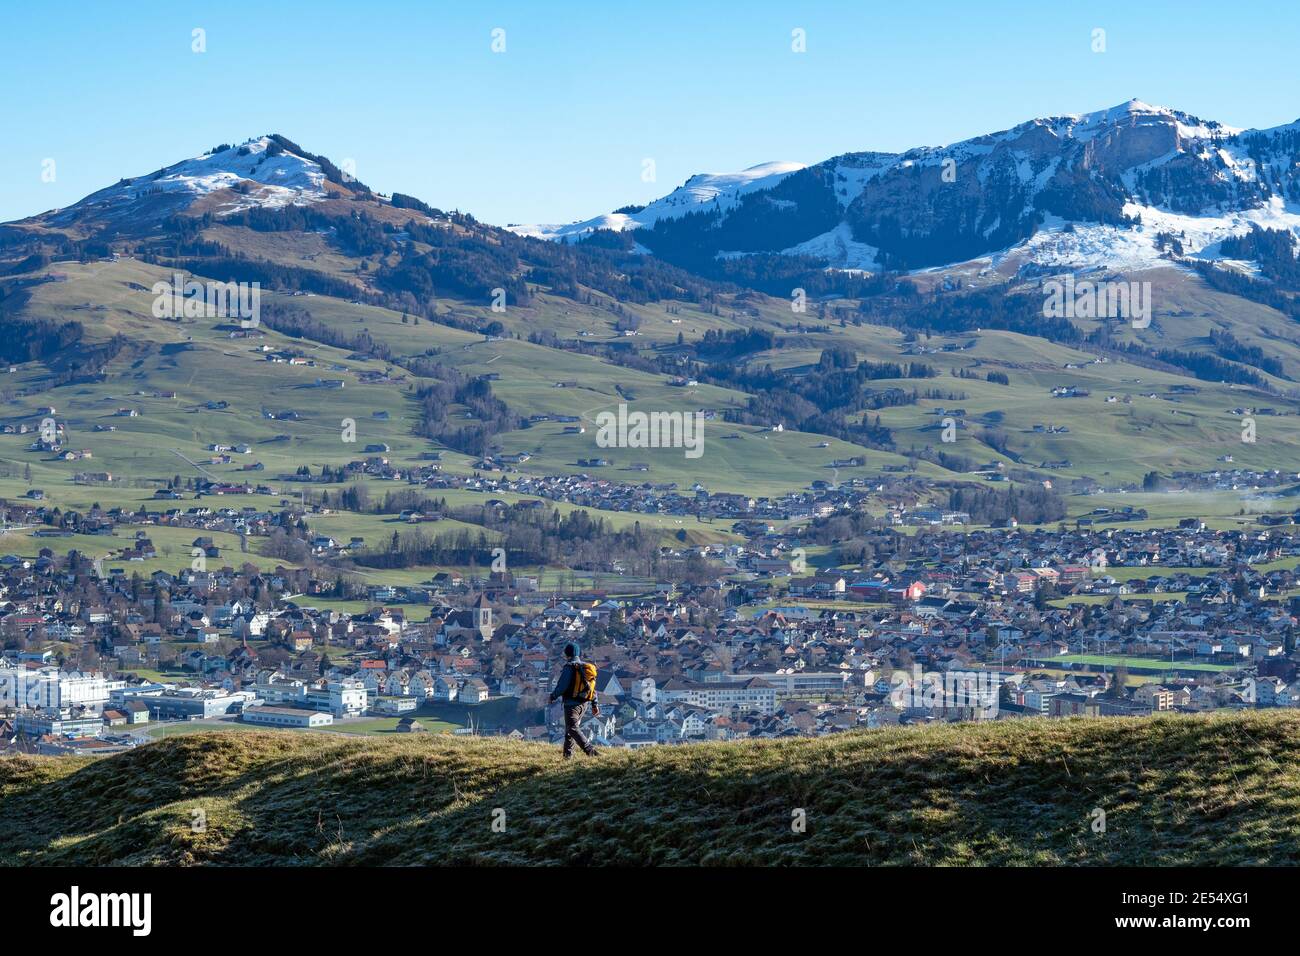 Hiker walking down from Hintere Hoehi towards the village Appenzell, Switzerland Stock Photo